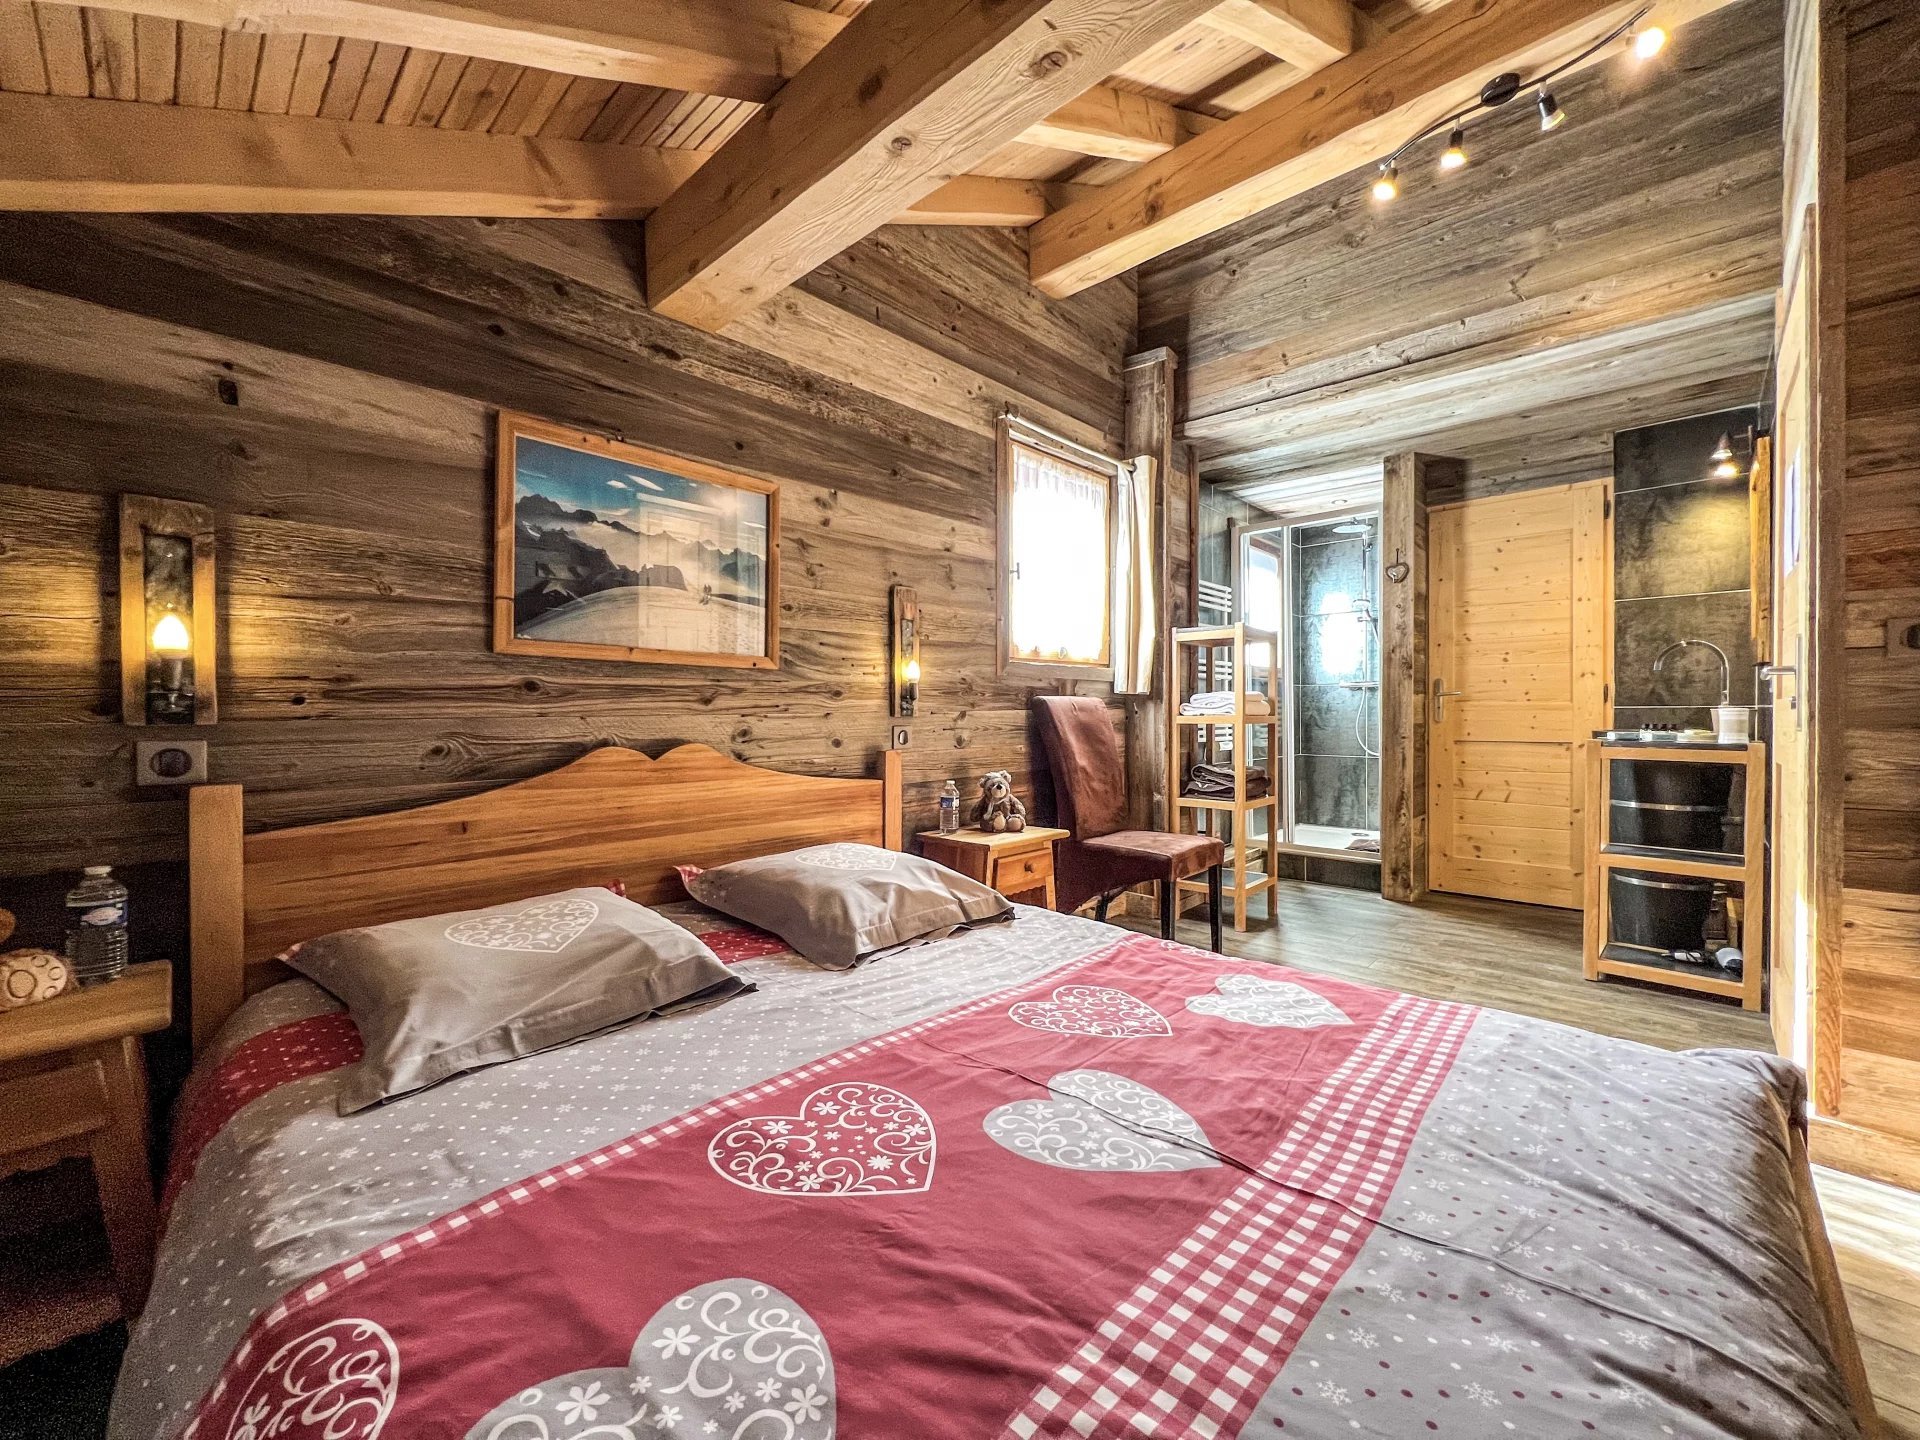 Francis+York+ Luxury Chalet in the La Plagne, French Alps 00001.jpeg